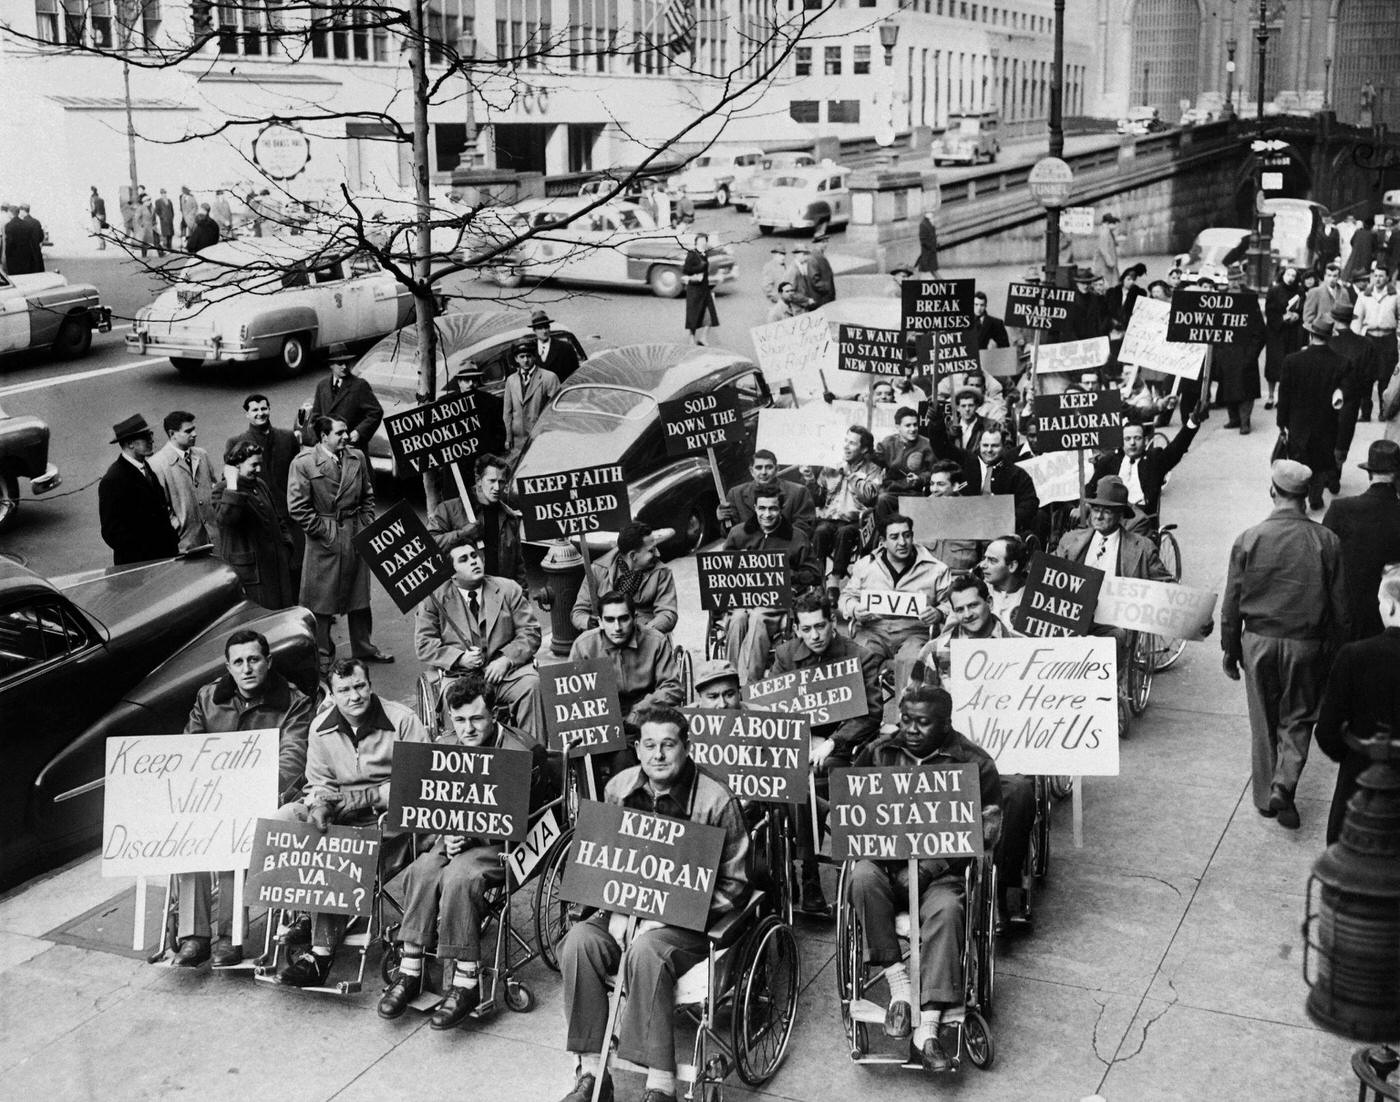 American War Invalids In Wheelchairs Protest Against The Early Closure Of Halloran Hospital On Park Avenue, Manhattan, 1951